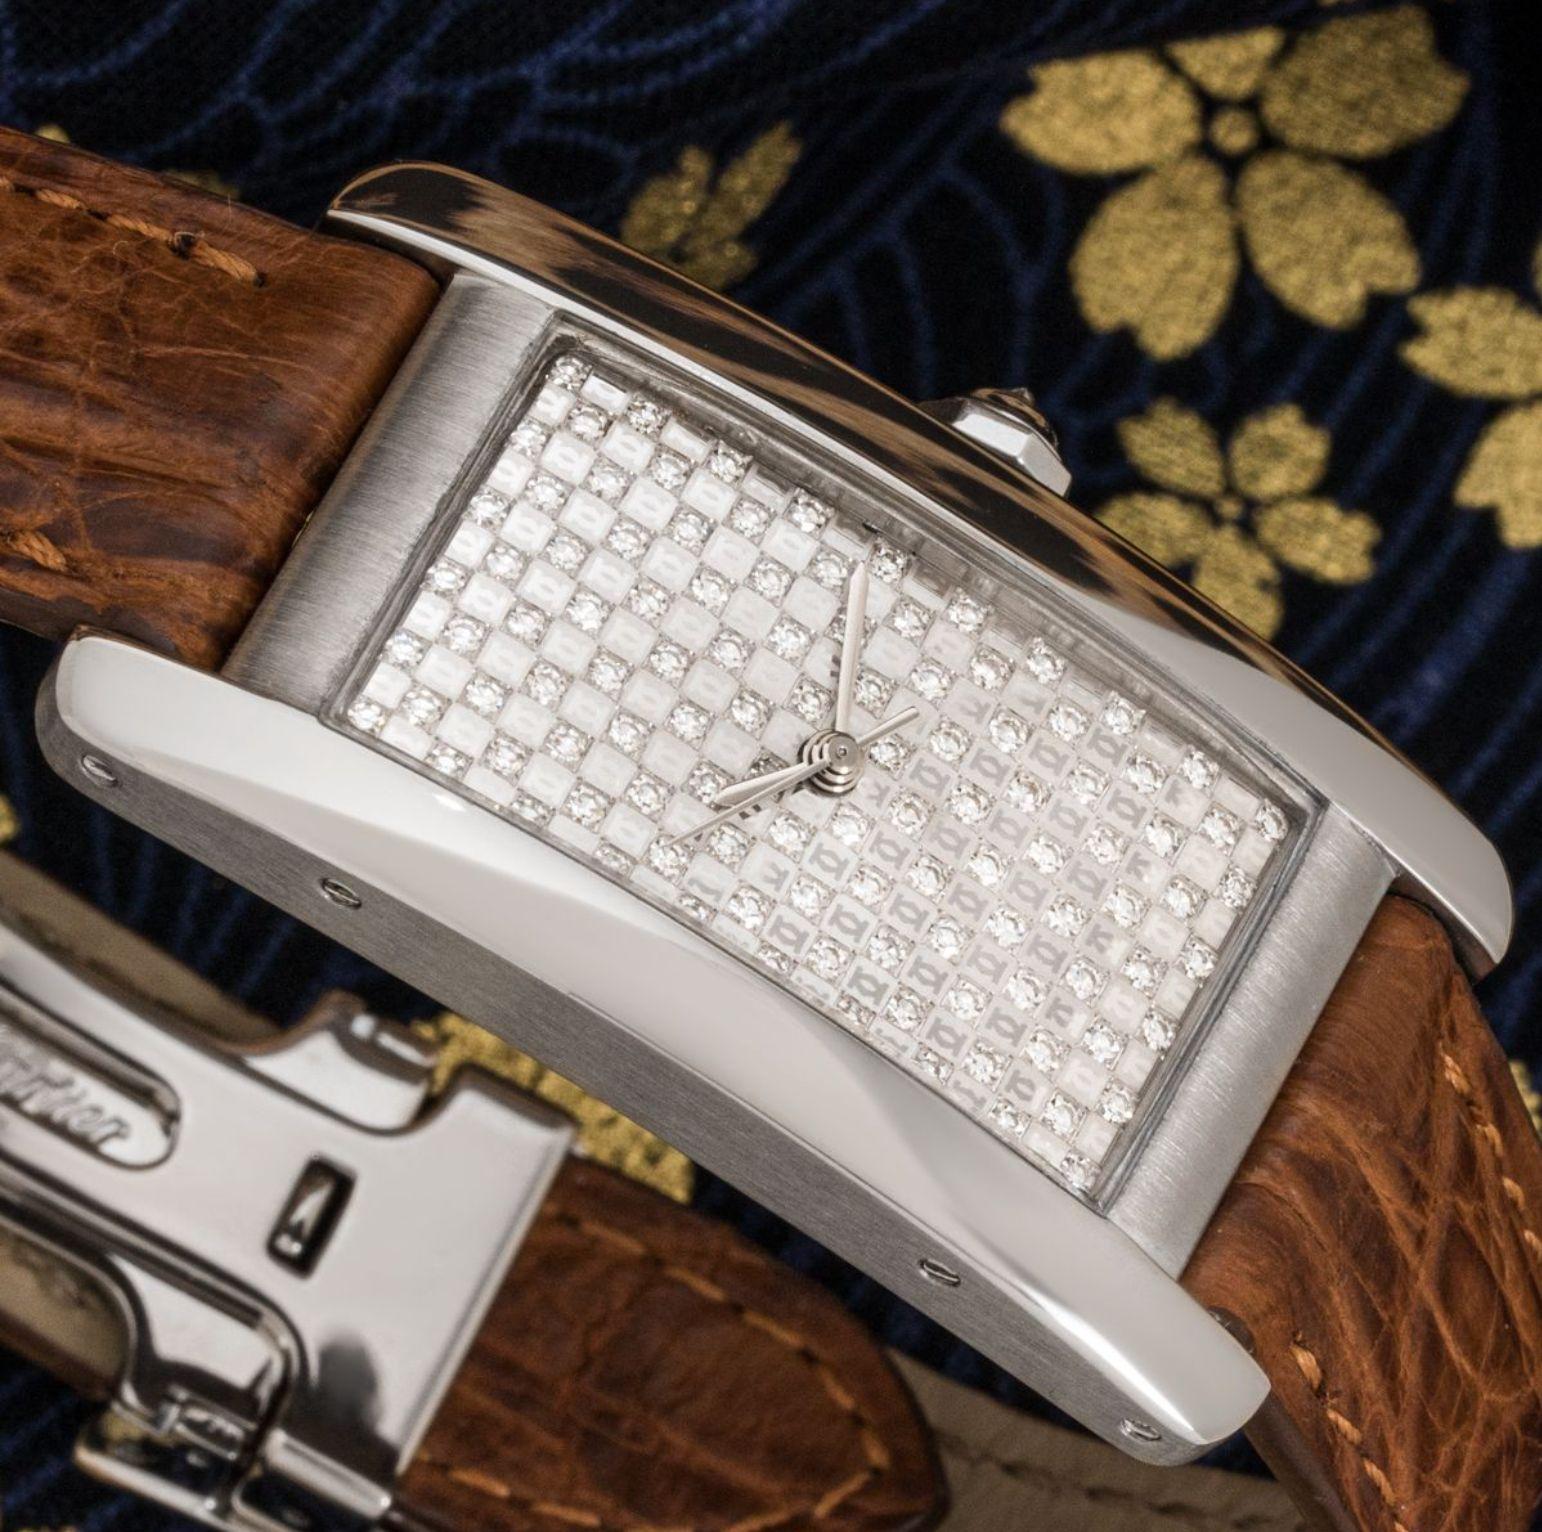 A ladies white gold Tank Americaine by Cartier. Featuring a distinctive pave set diamond dial with a white gold bezel and a crown set with an inverted diamond.

Fitted with a sapphire glass, a self-winding automatic movement and a Cartier brown